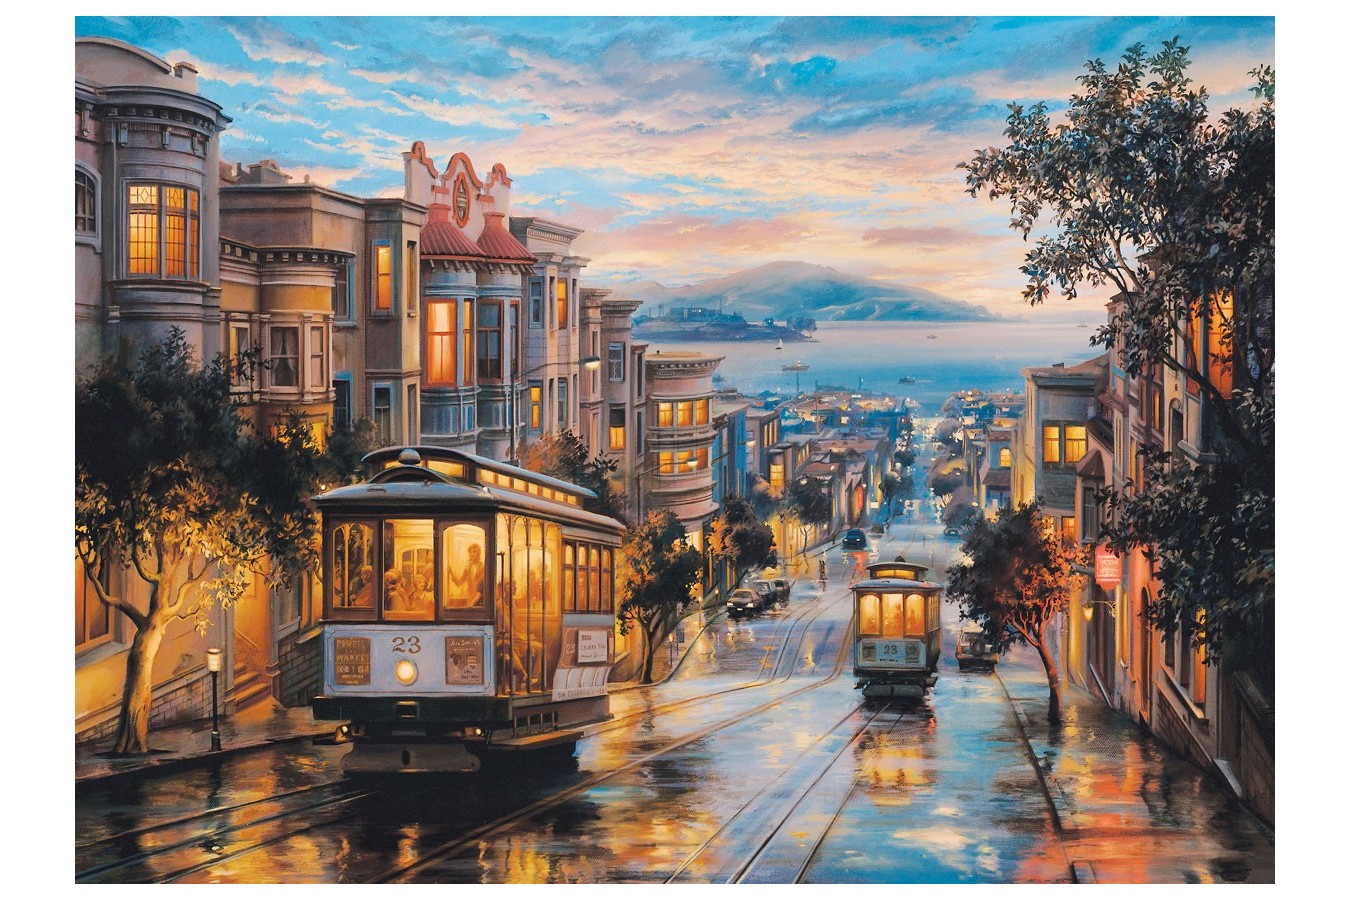 Puzzle Eurographics - Eugeny Lushpin: San Francisco, Cable Car Heaven, 1000 piese (6000-0957)